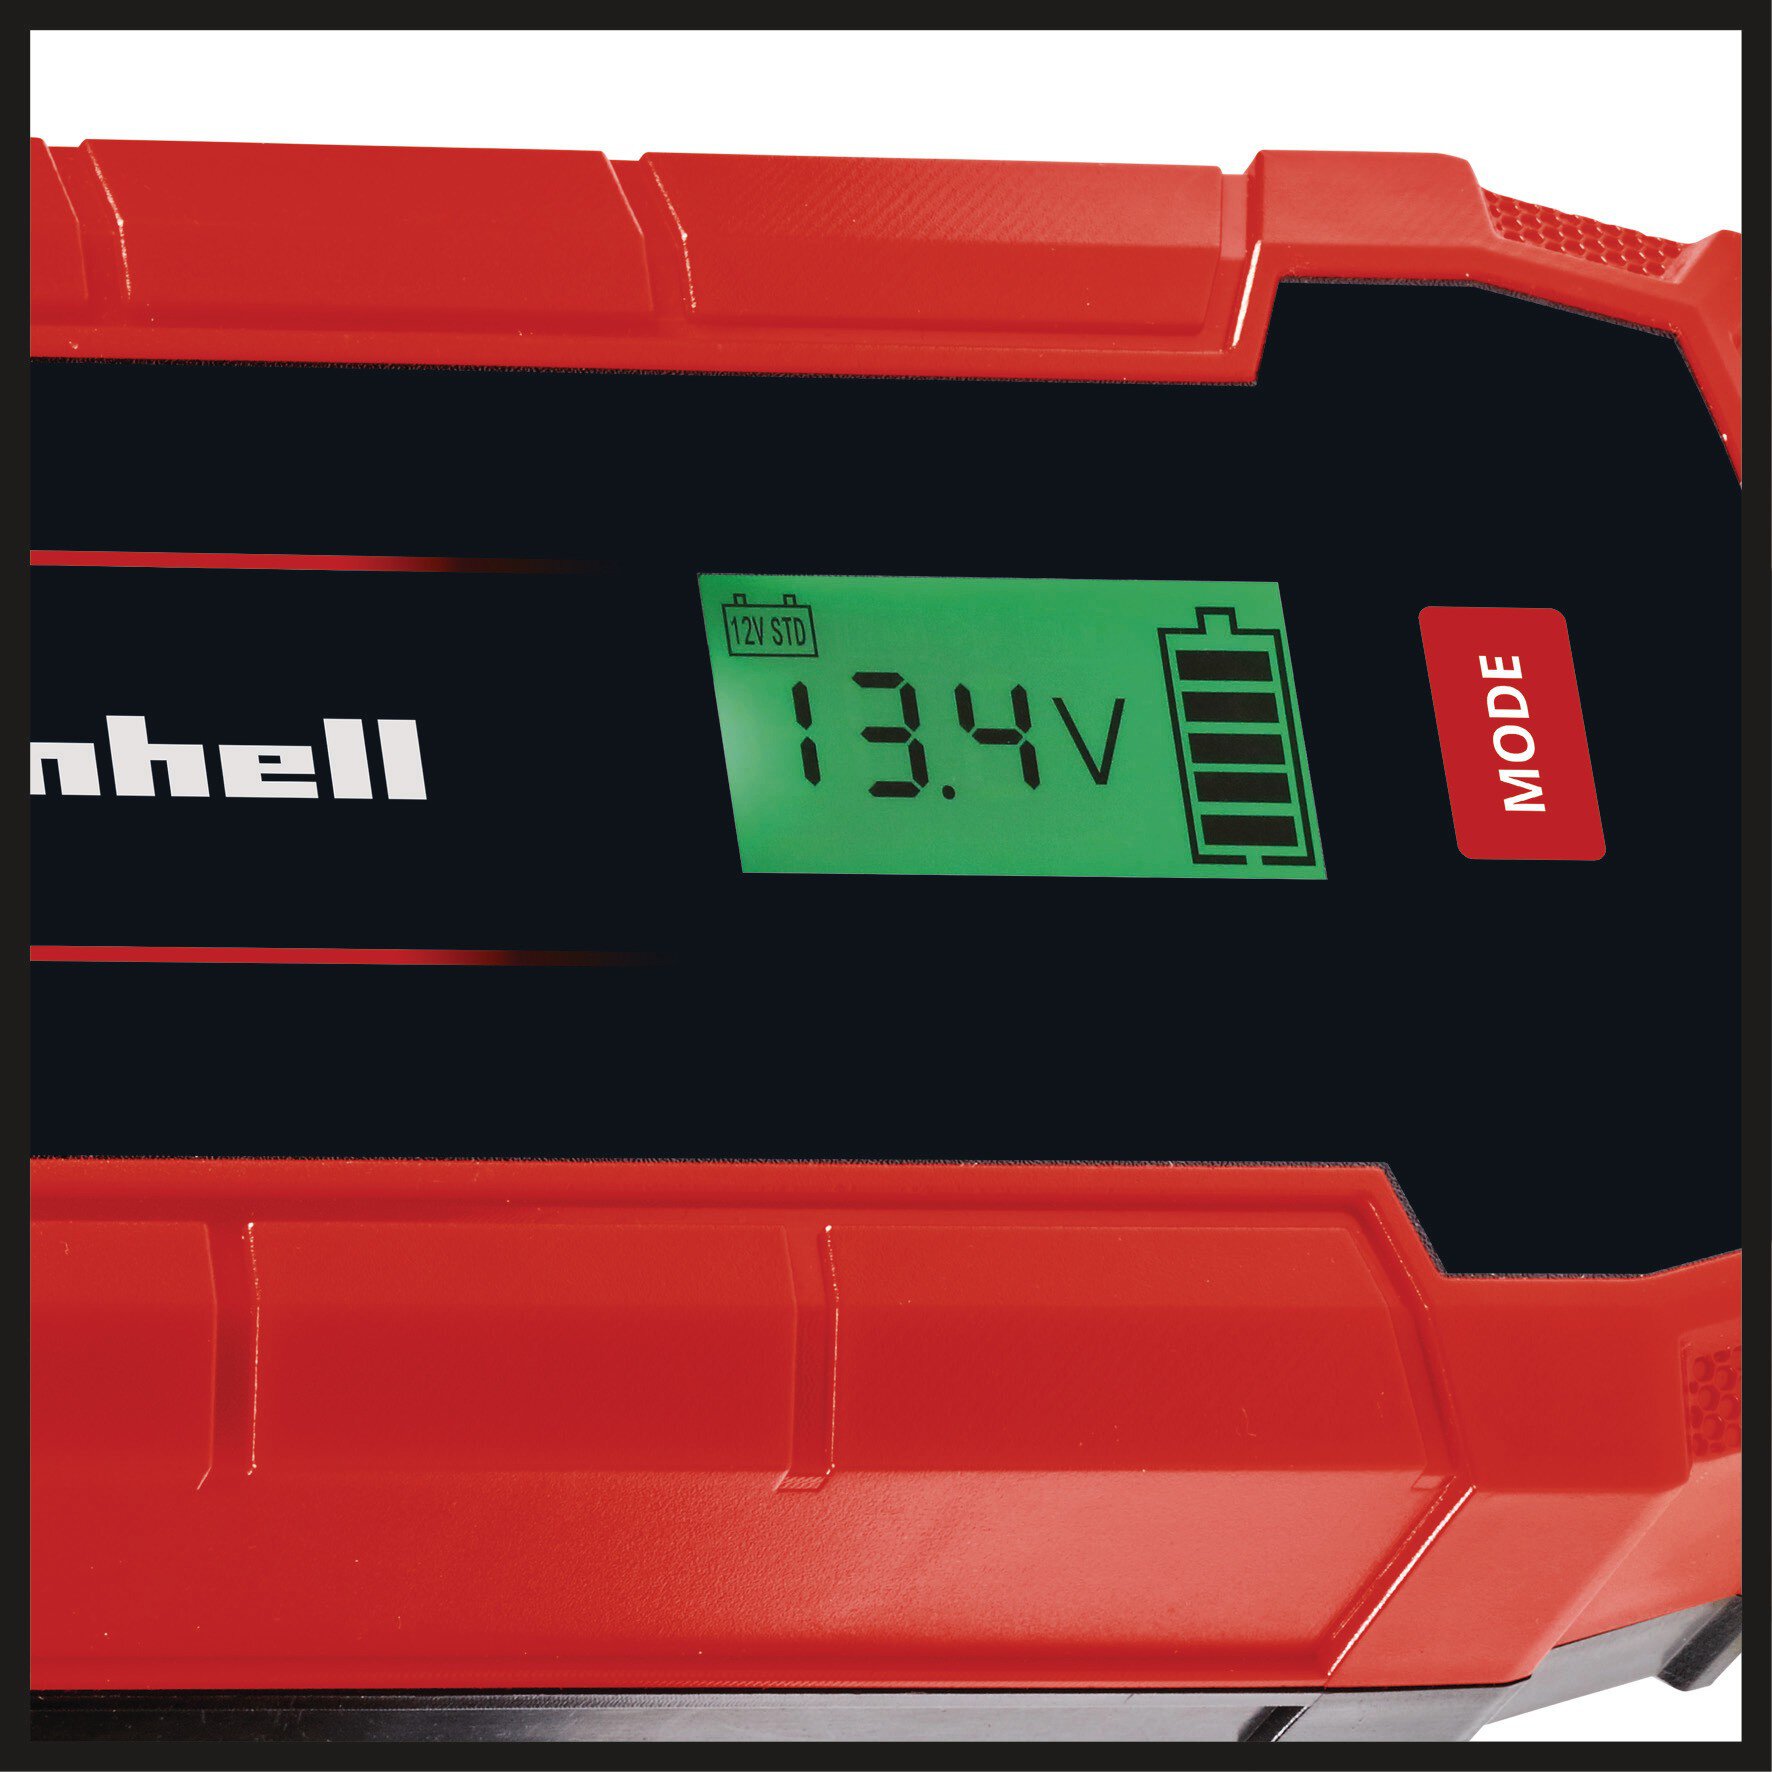 einhell-car-expert-battery-charger-1002245-detail_image-002